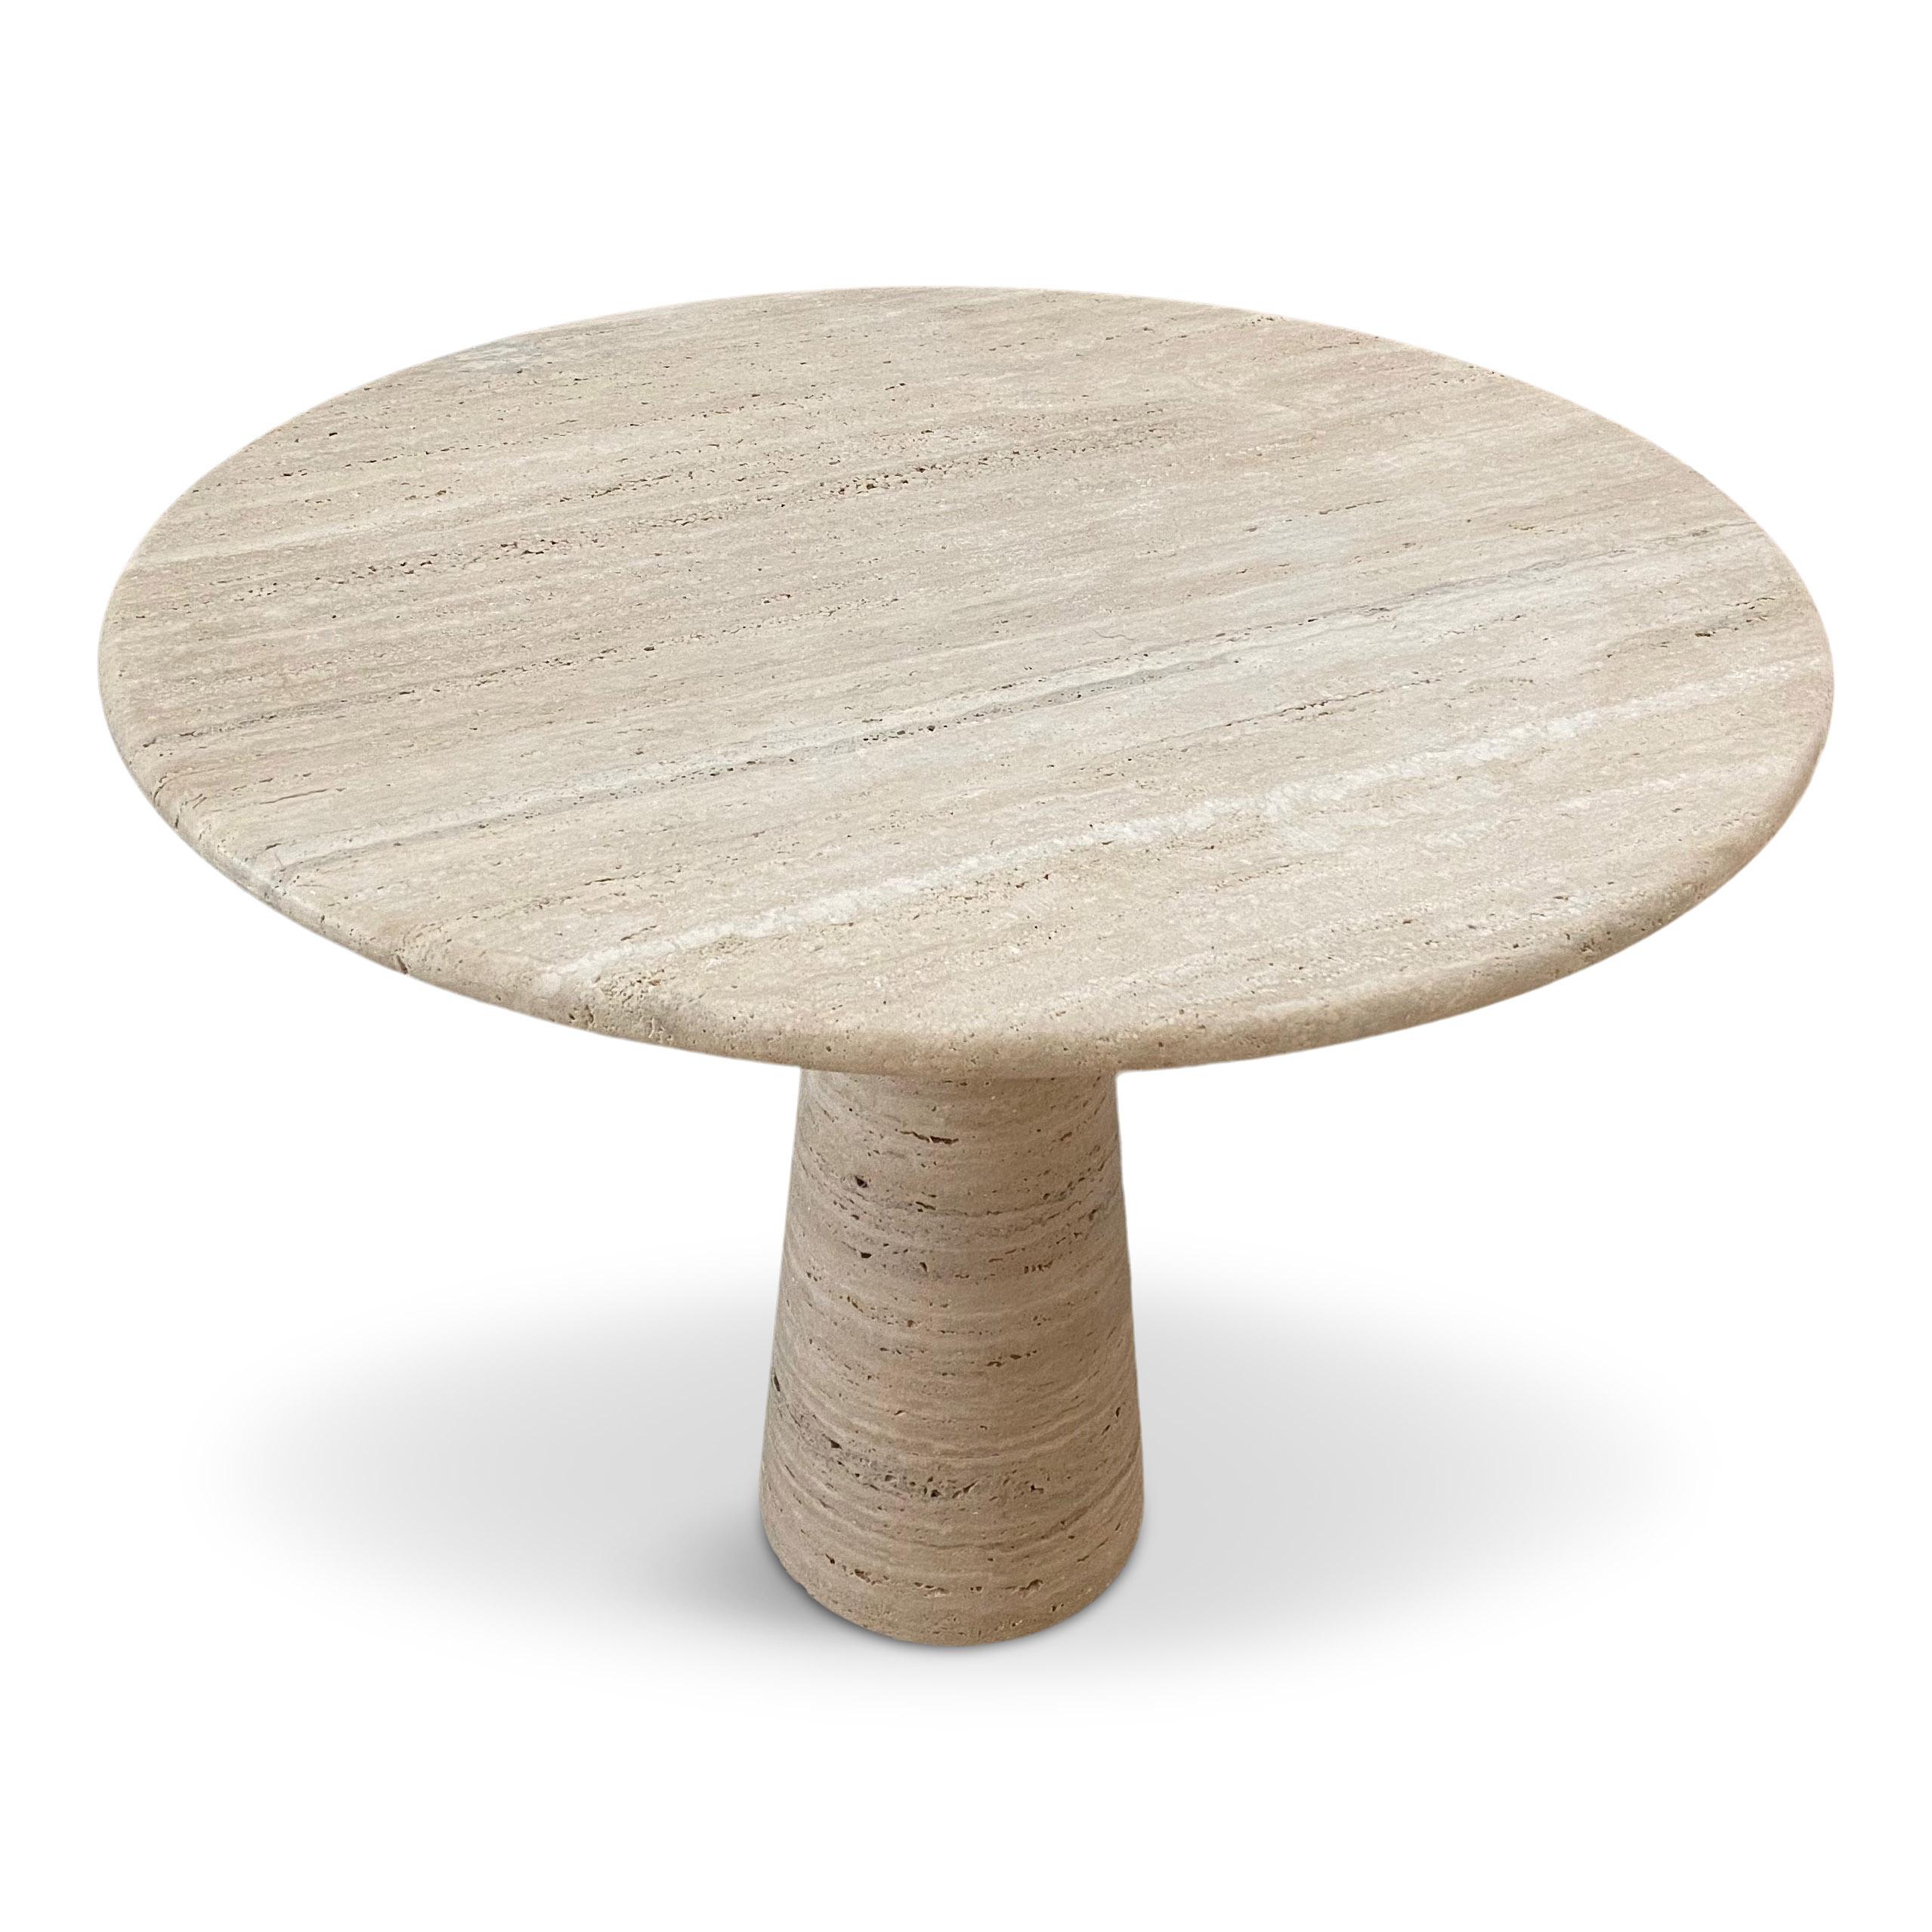 Bespoke Round Italian Dining Table in Travertine For Sale 2